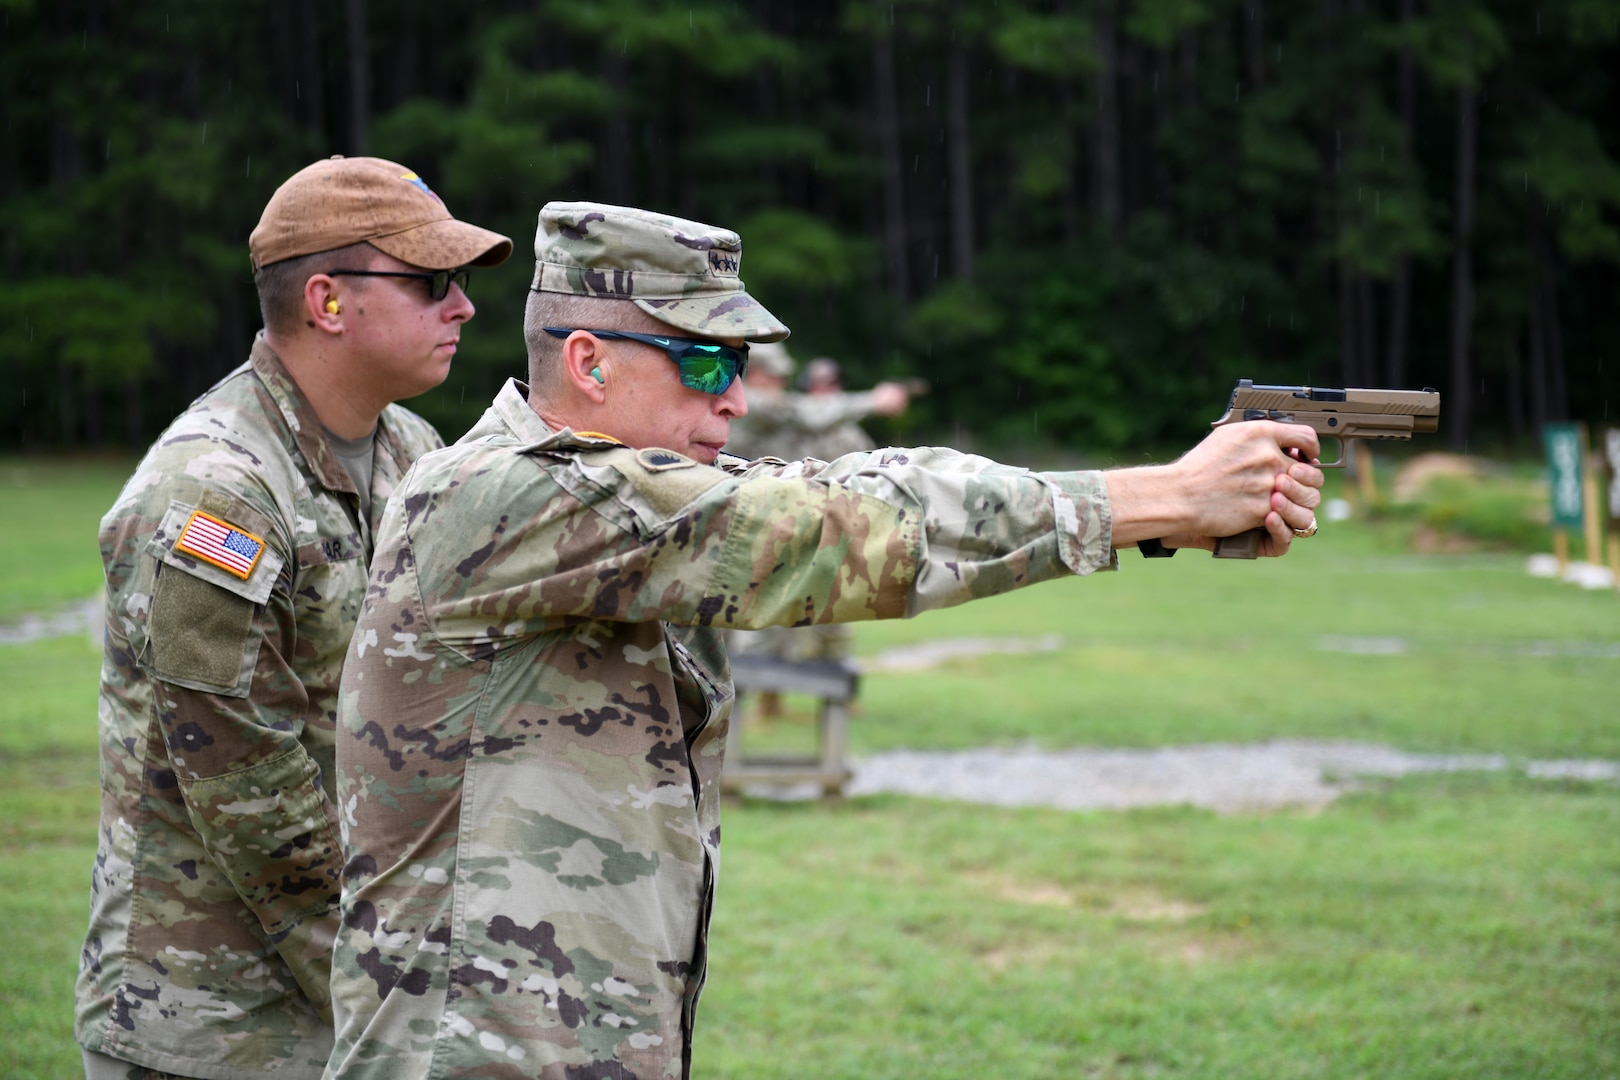 Gen. Daniel Hokanson, chief of the National Guard Bureau, completed a weapons qualification course for the M17 pistol and M4 carbine at Fort Pickett Maneuver Training Center in Blackstone, Virginia, Aug. 1, 2022. Hokanson experienced firsthand the latest individual weapons qualification standards expected of all Soldiers in the National Guard while demonstrating his proficiency in marksmanship—a basic and essential Soldier skill.